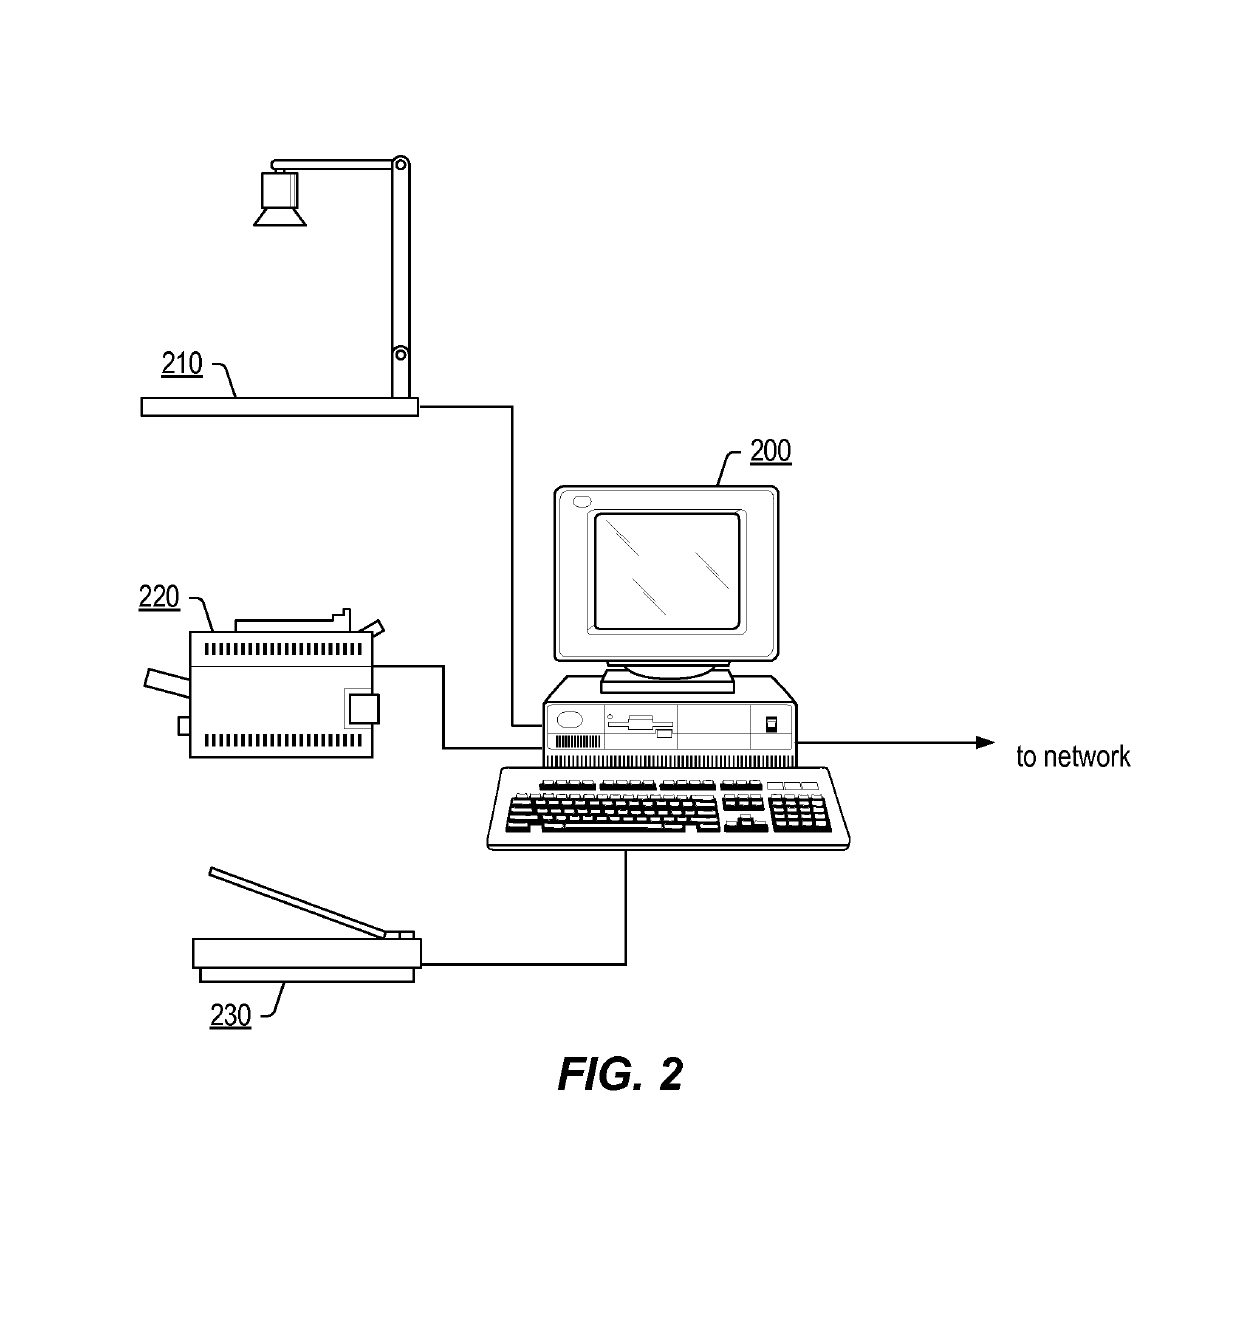 System and method for remotely supervising and verifying pharmacy functions